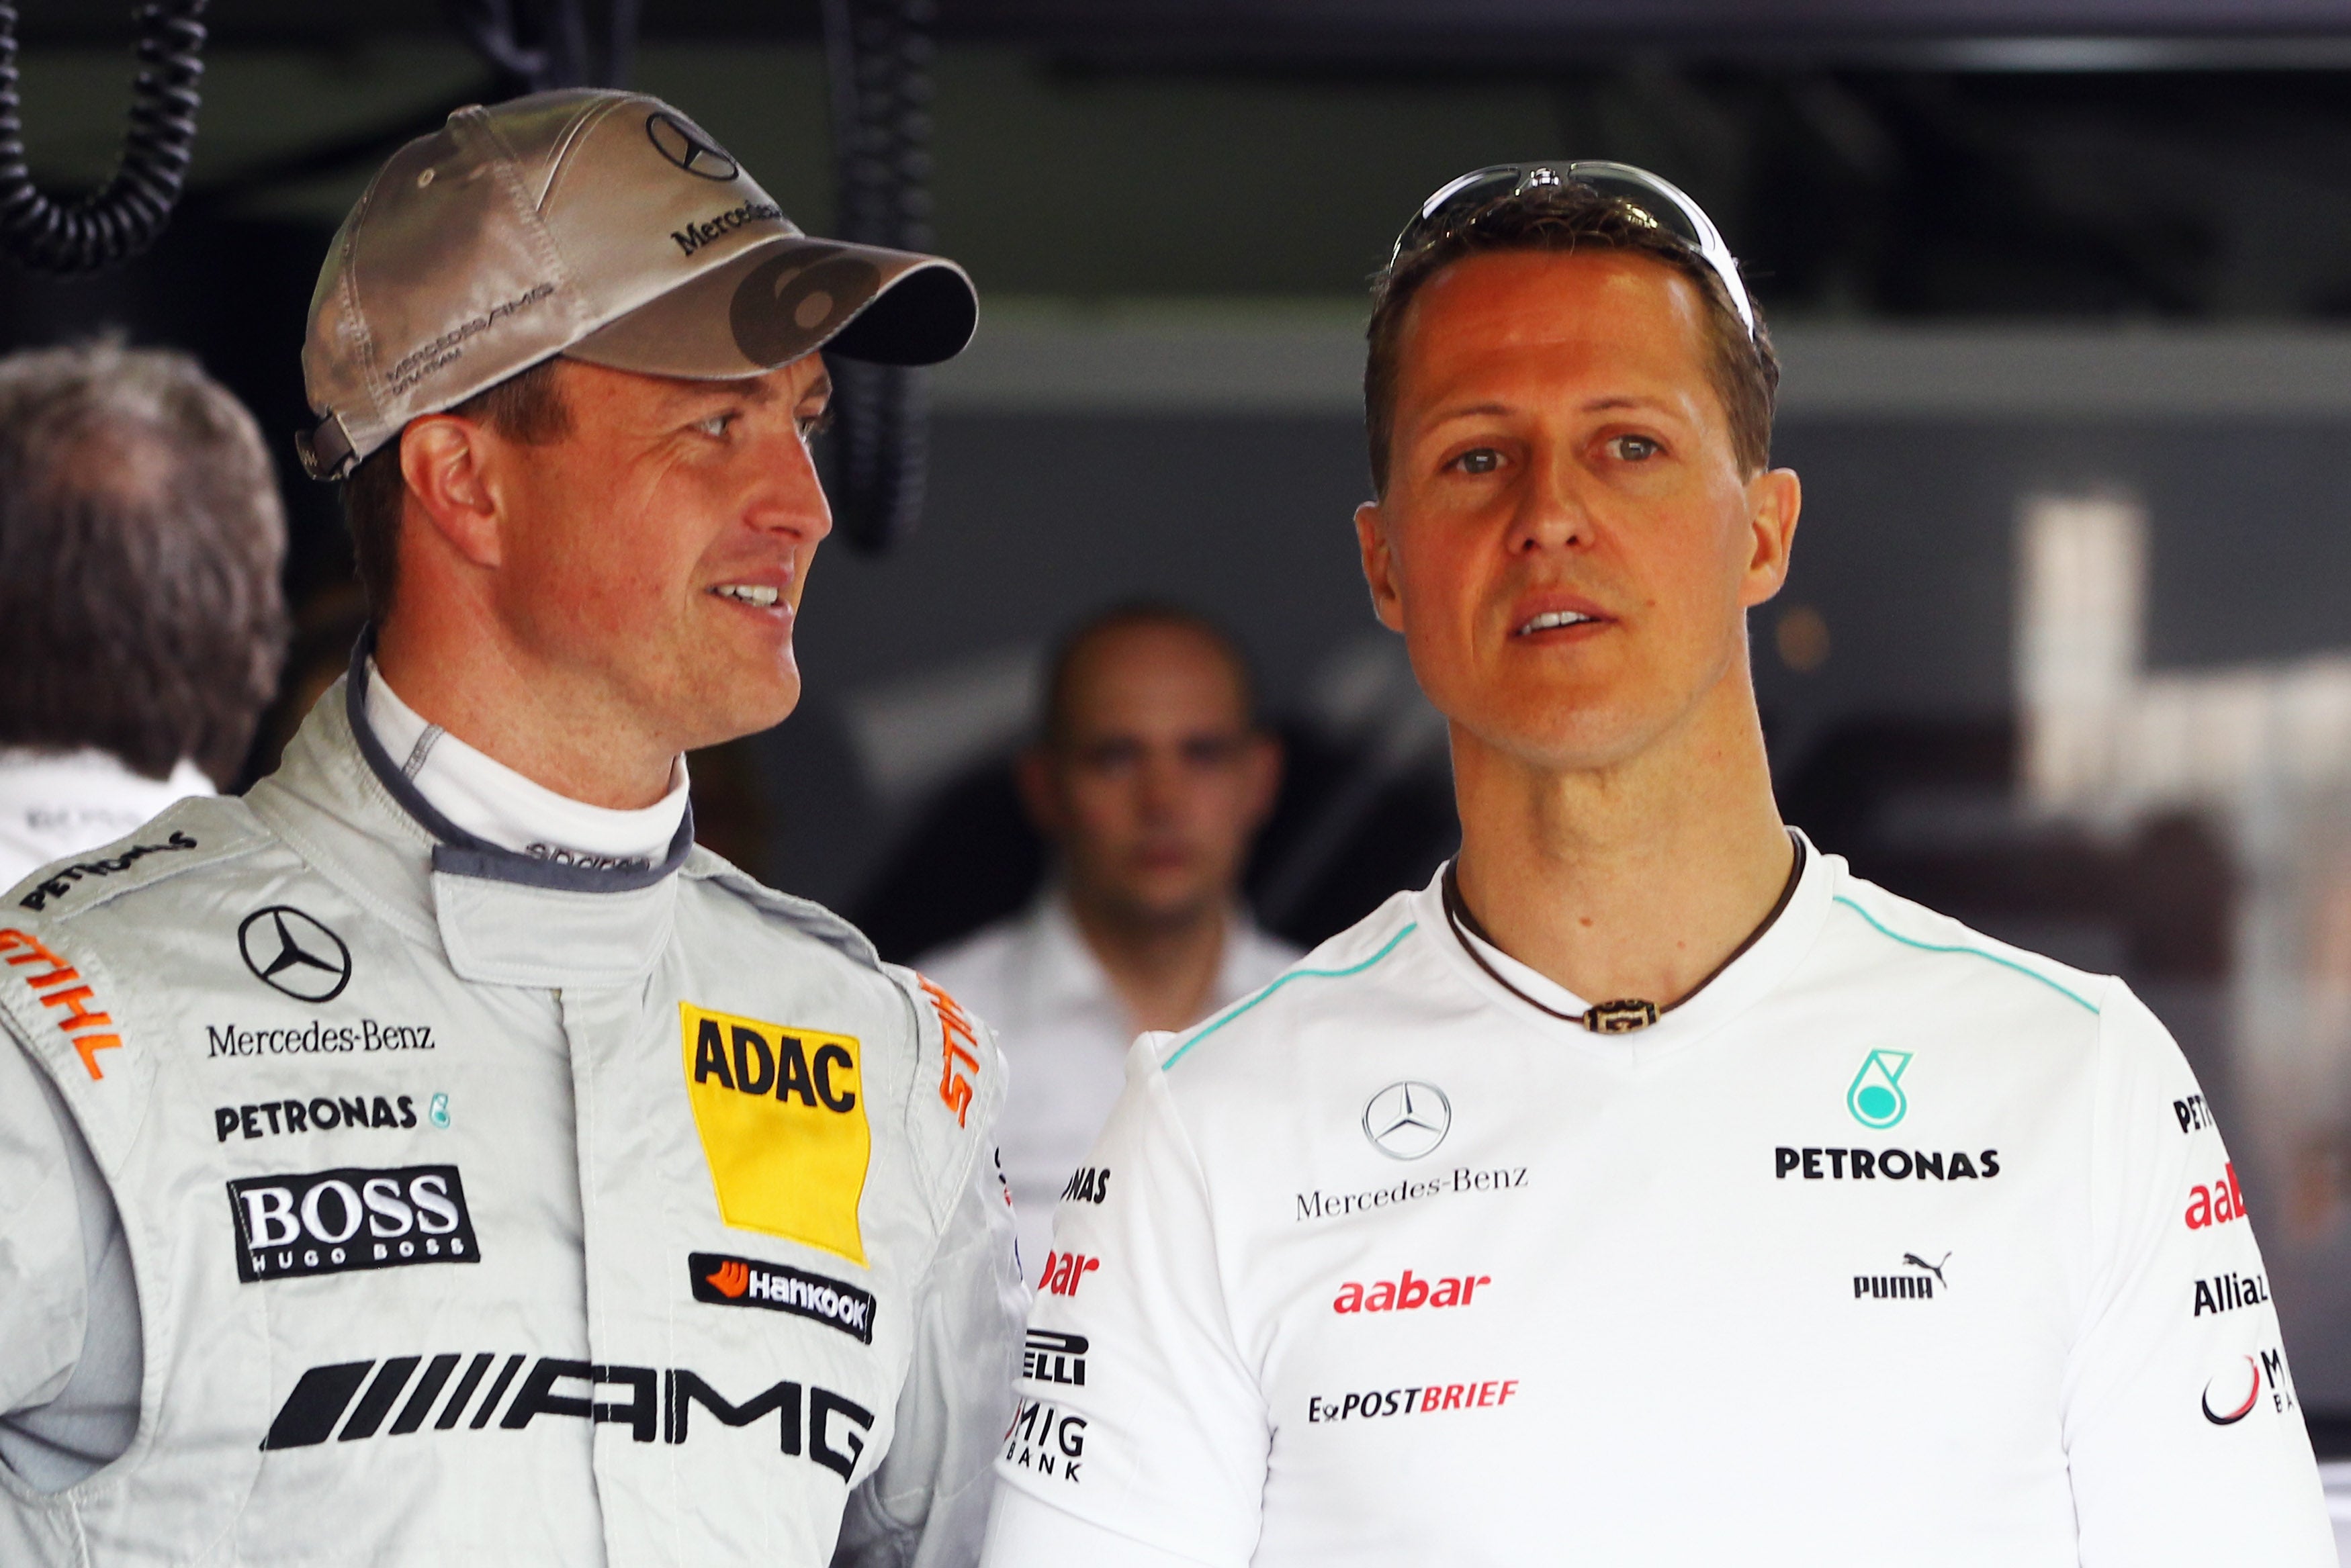 Ralf and Michael Schumacher raced together in the Formula 1